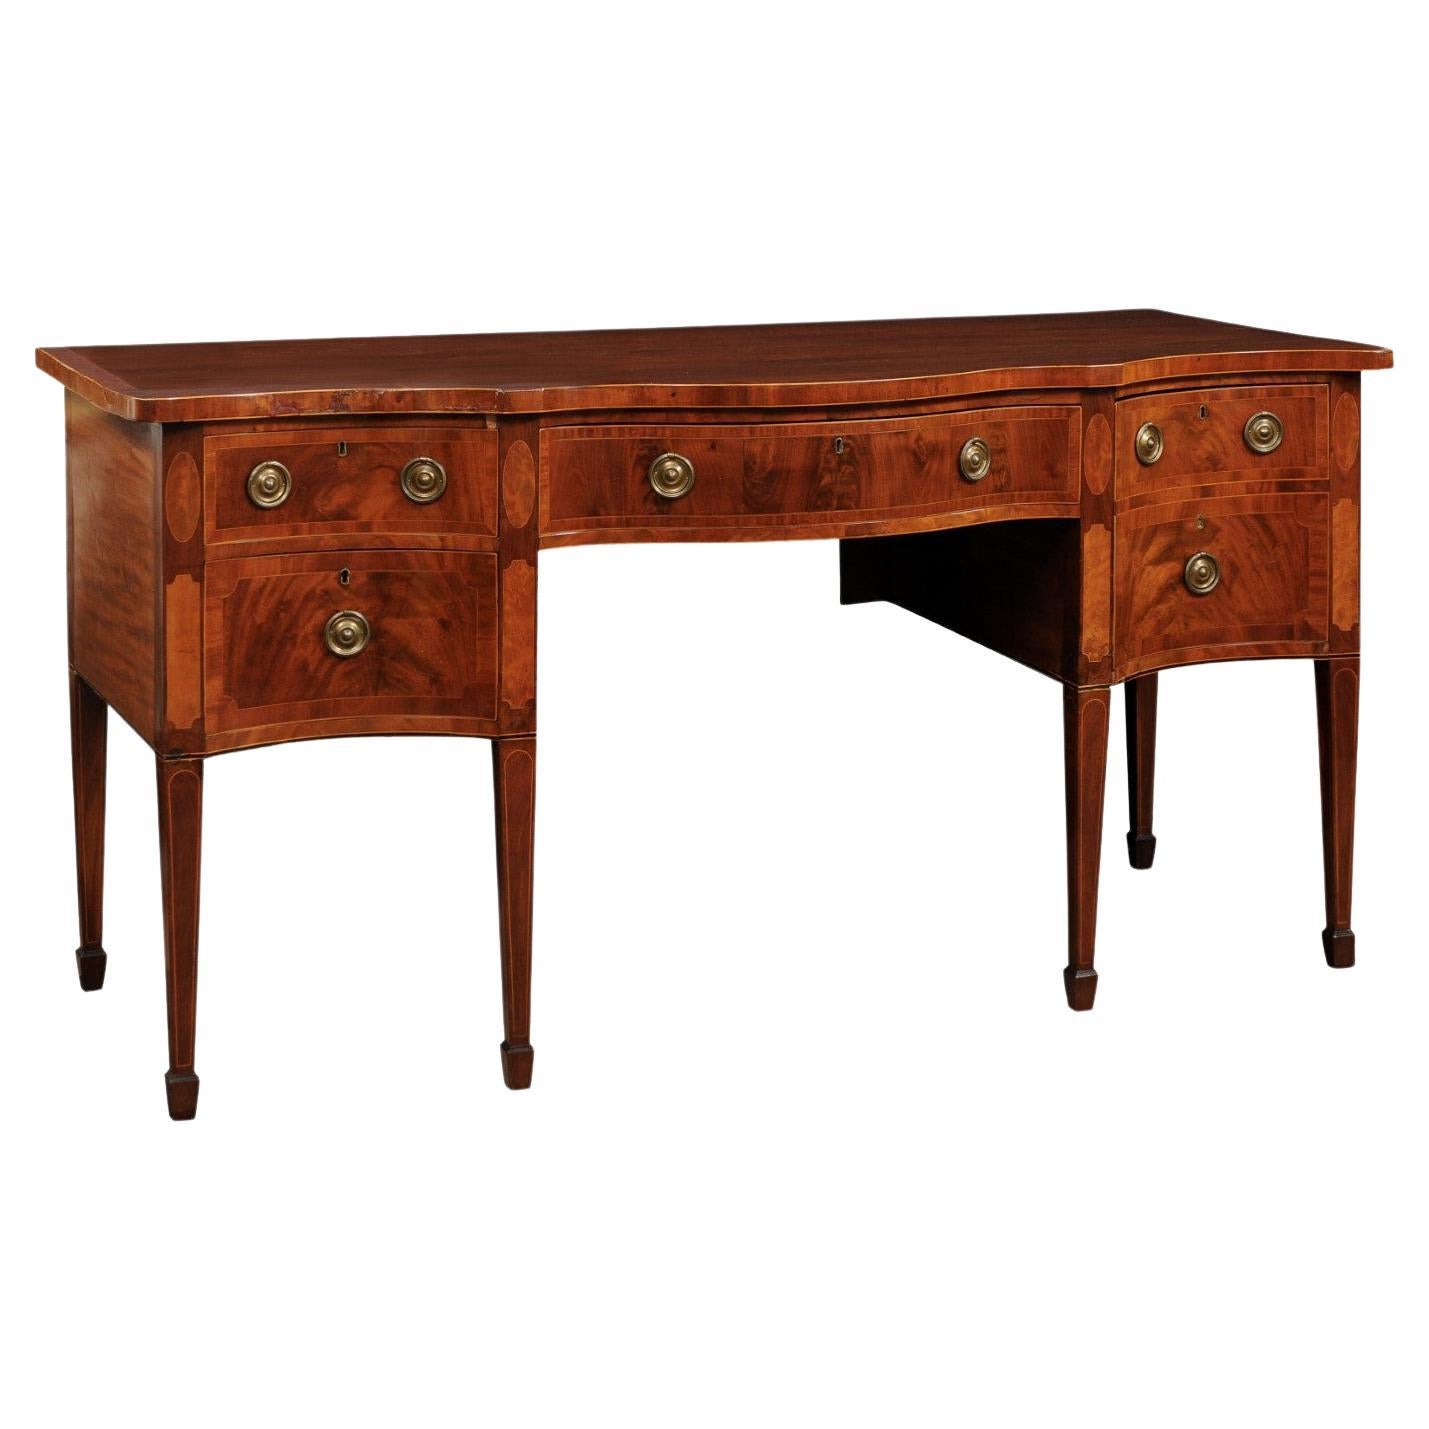 19th Century English Mahogany Sideboard w/ Serpentine Front For Sale